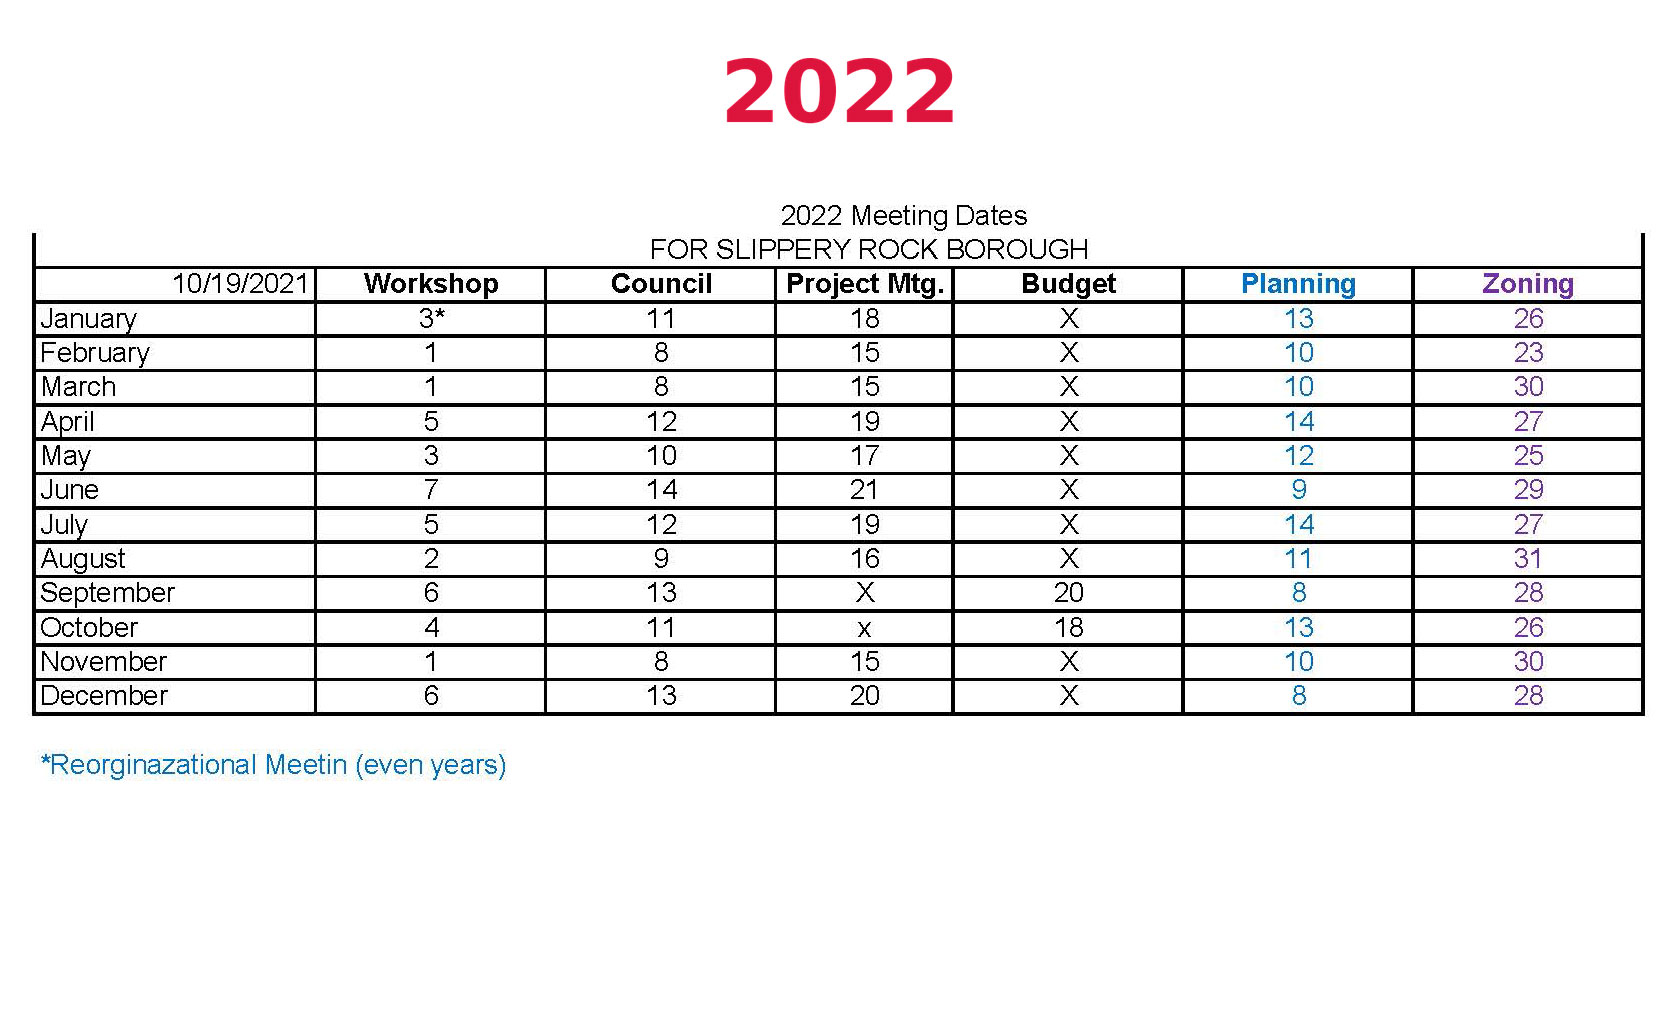 Chart of the 2022 Meeting Dates